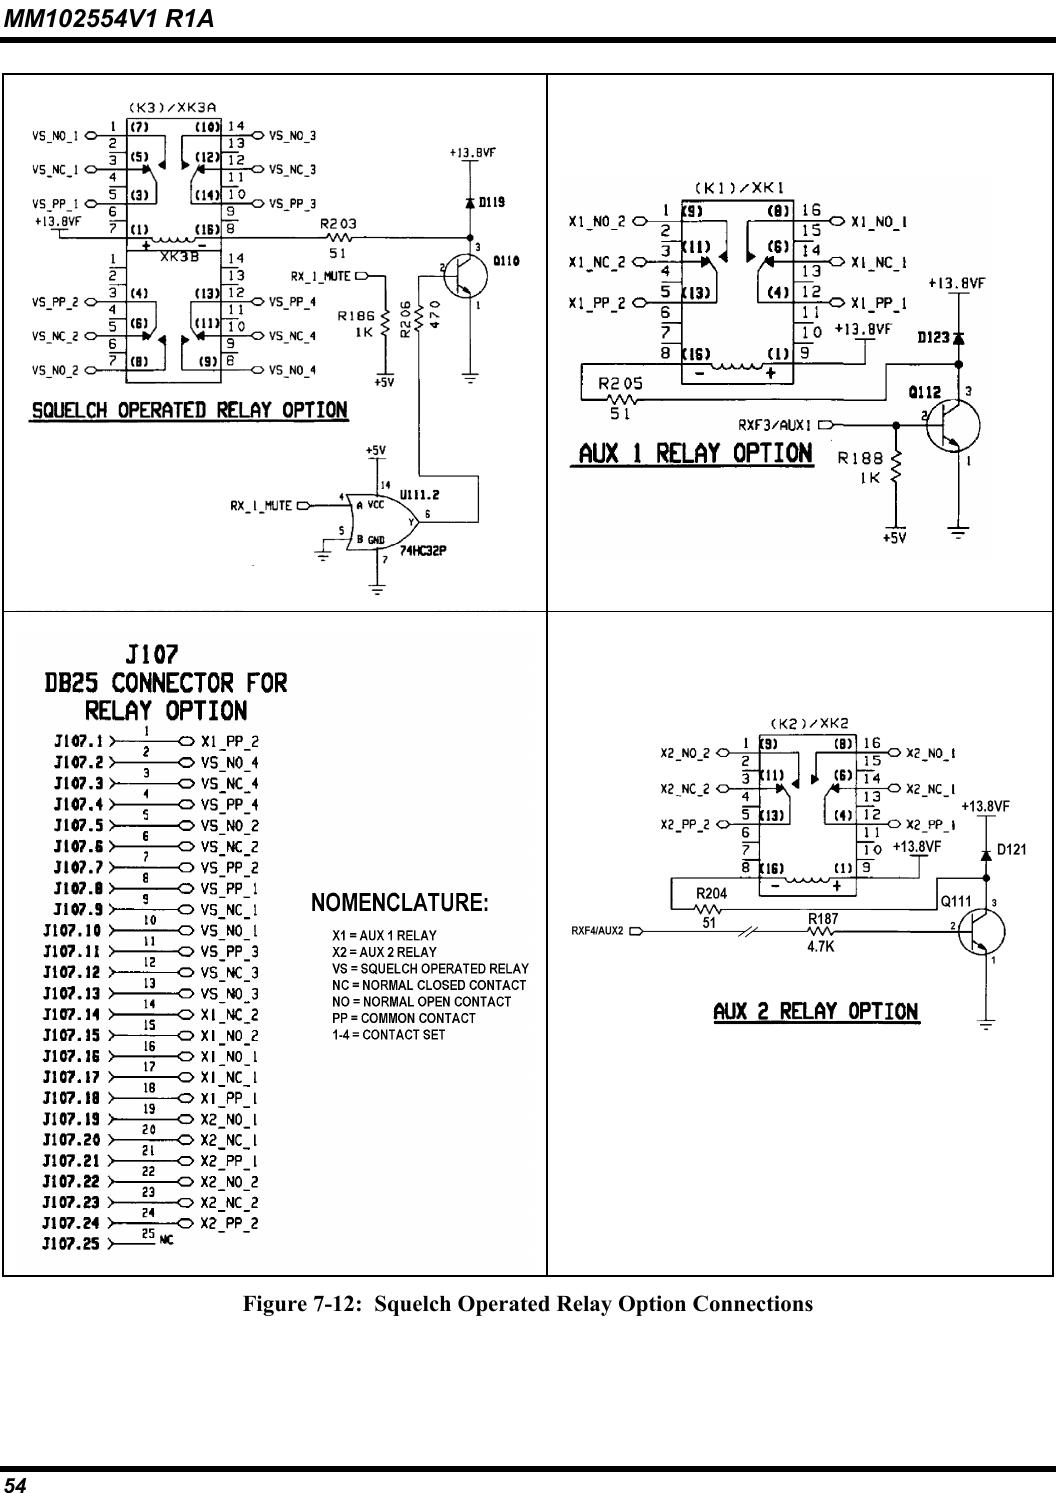 MM102554V1 R1A 54       Figure 7-12:  Squelch Operated Relay Option Connections 